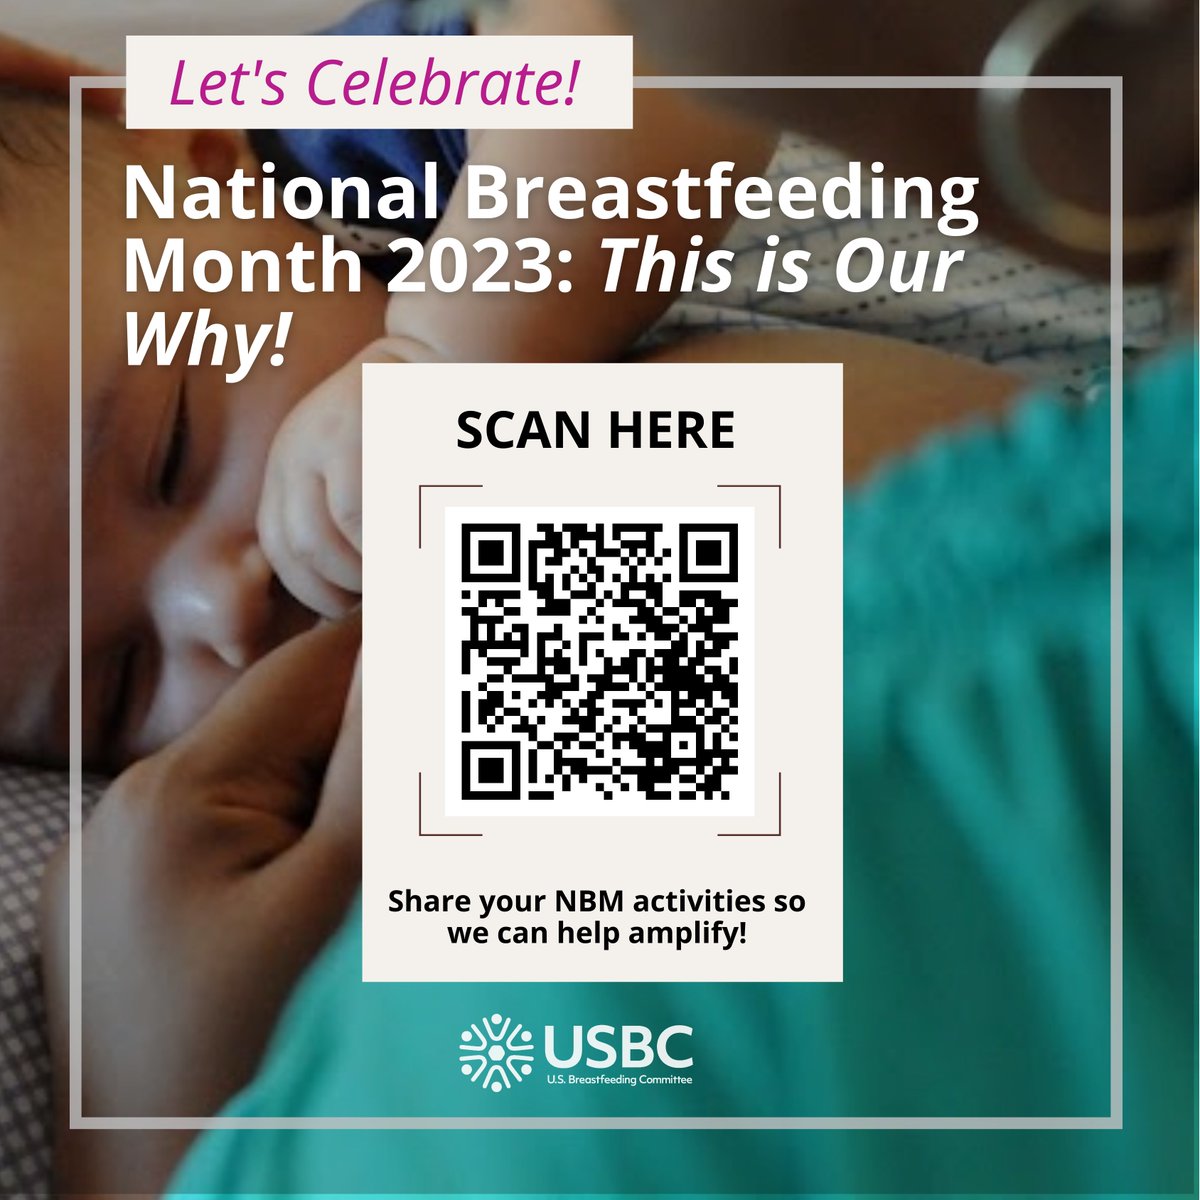 Black Breastfeeding Week starts Friday! Share your #blackbreastfeedingweek events & resources with us so we can celebrate with you: bit.ly/3qBLXqX #NationalBreastfeedingMonth #BBW23